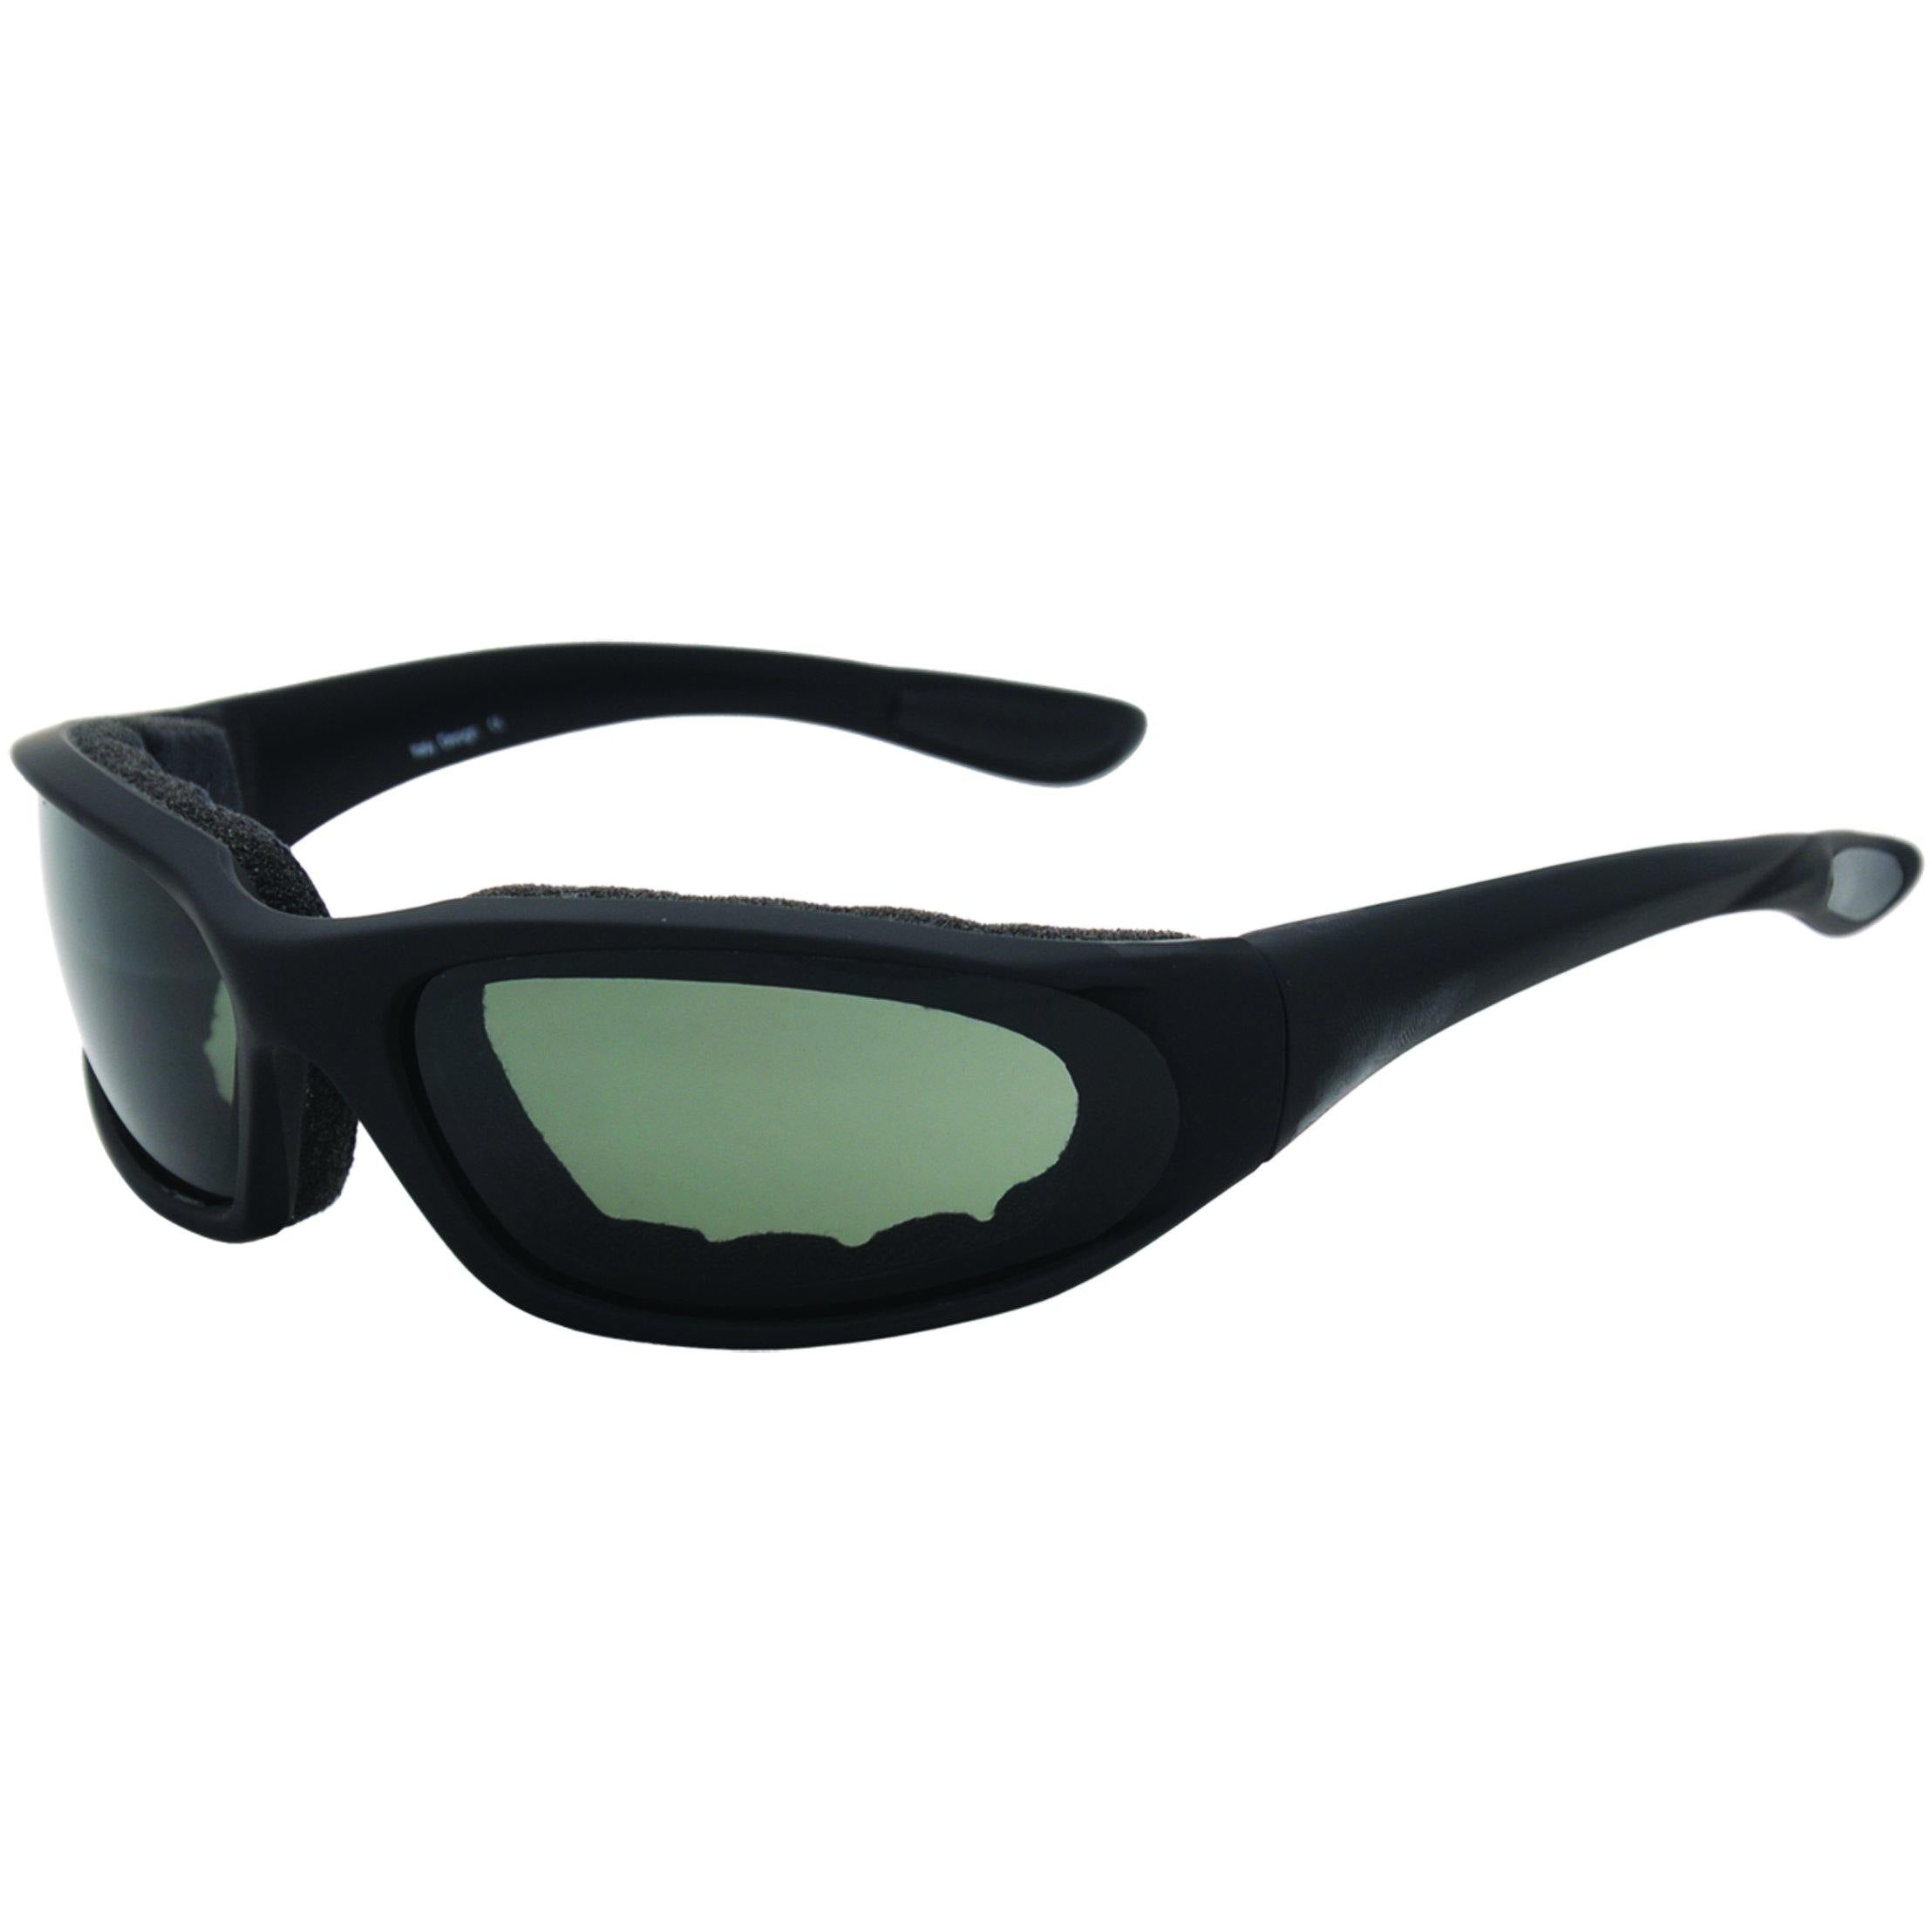 Replacement Lenses - Silverback